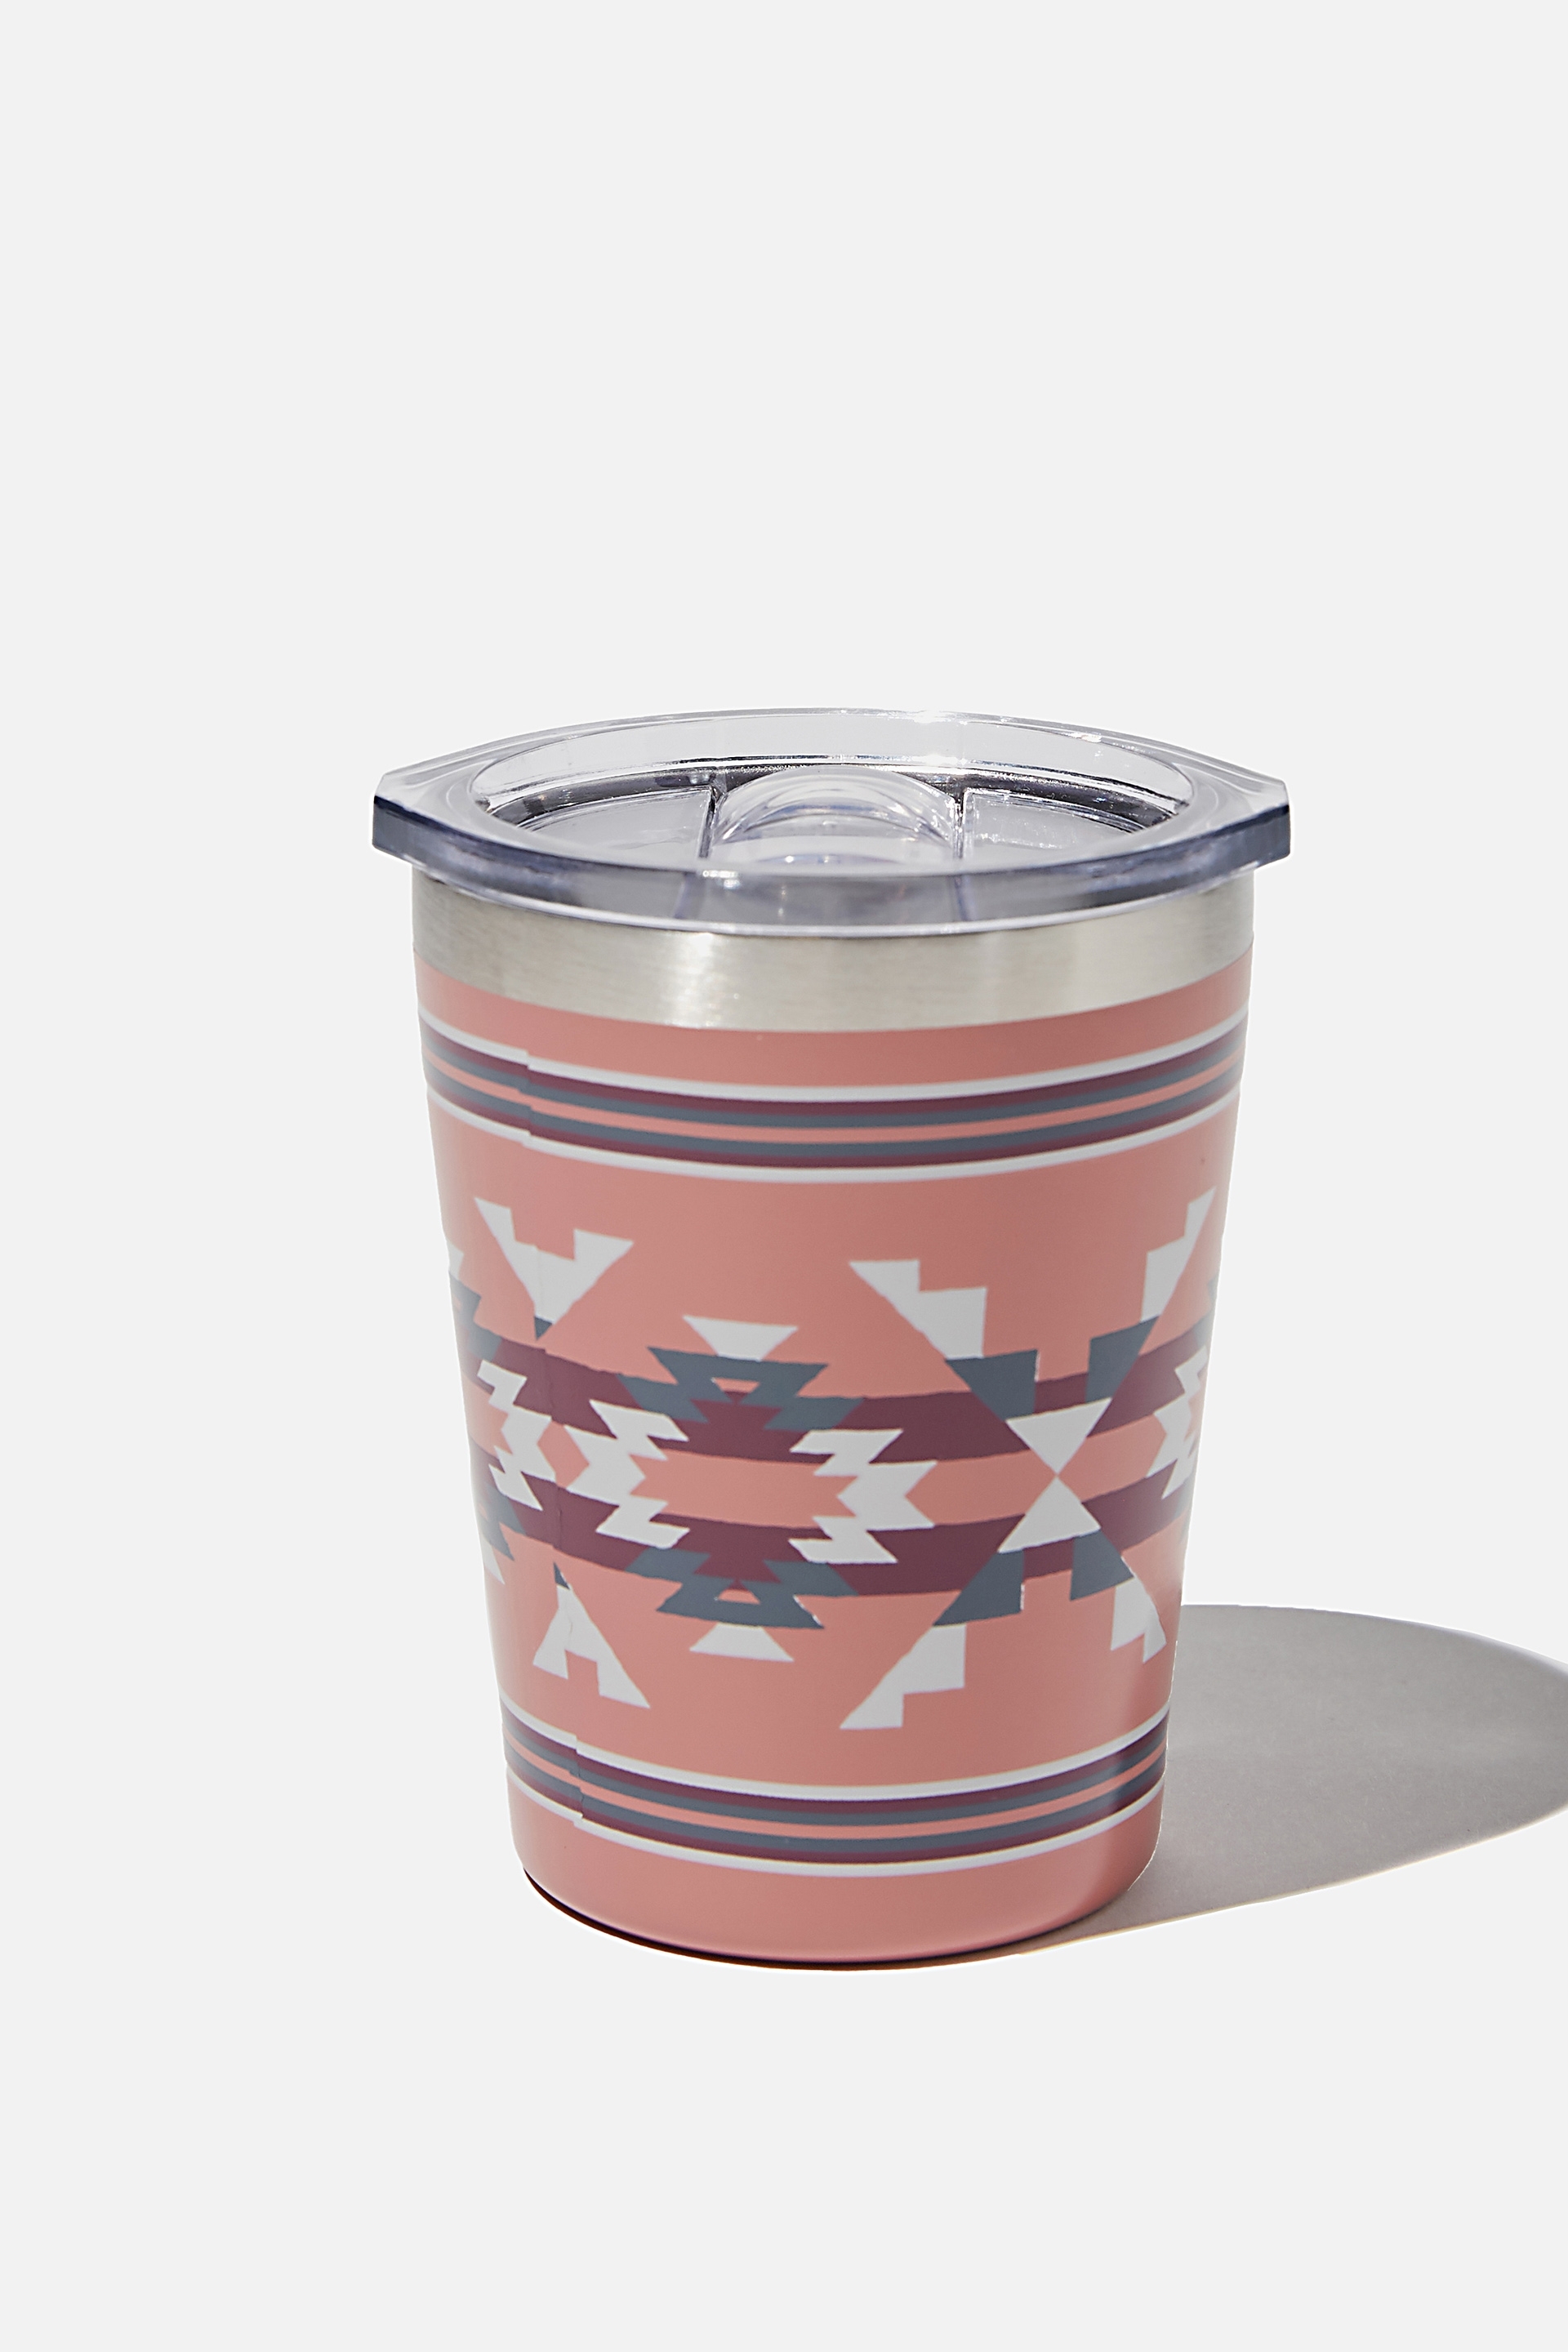 Cotton On Men - Small Stainless Steel Tumbler - Pink ikat